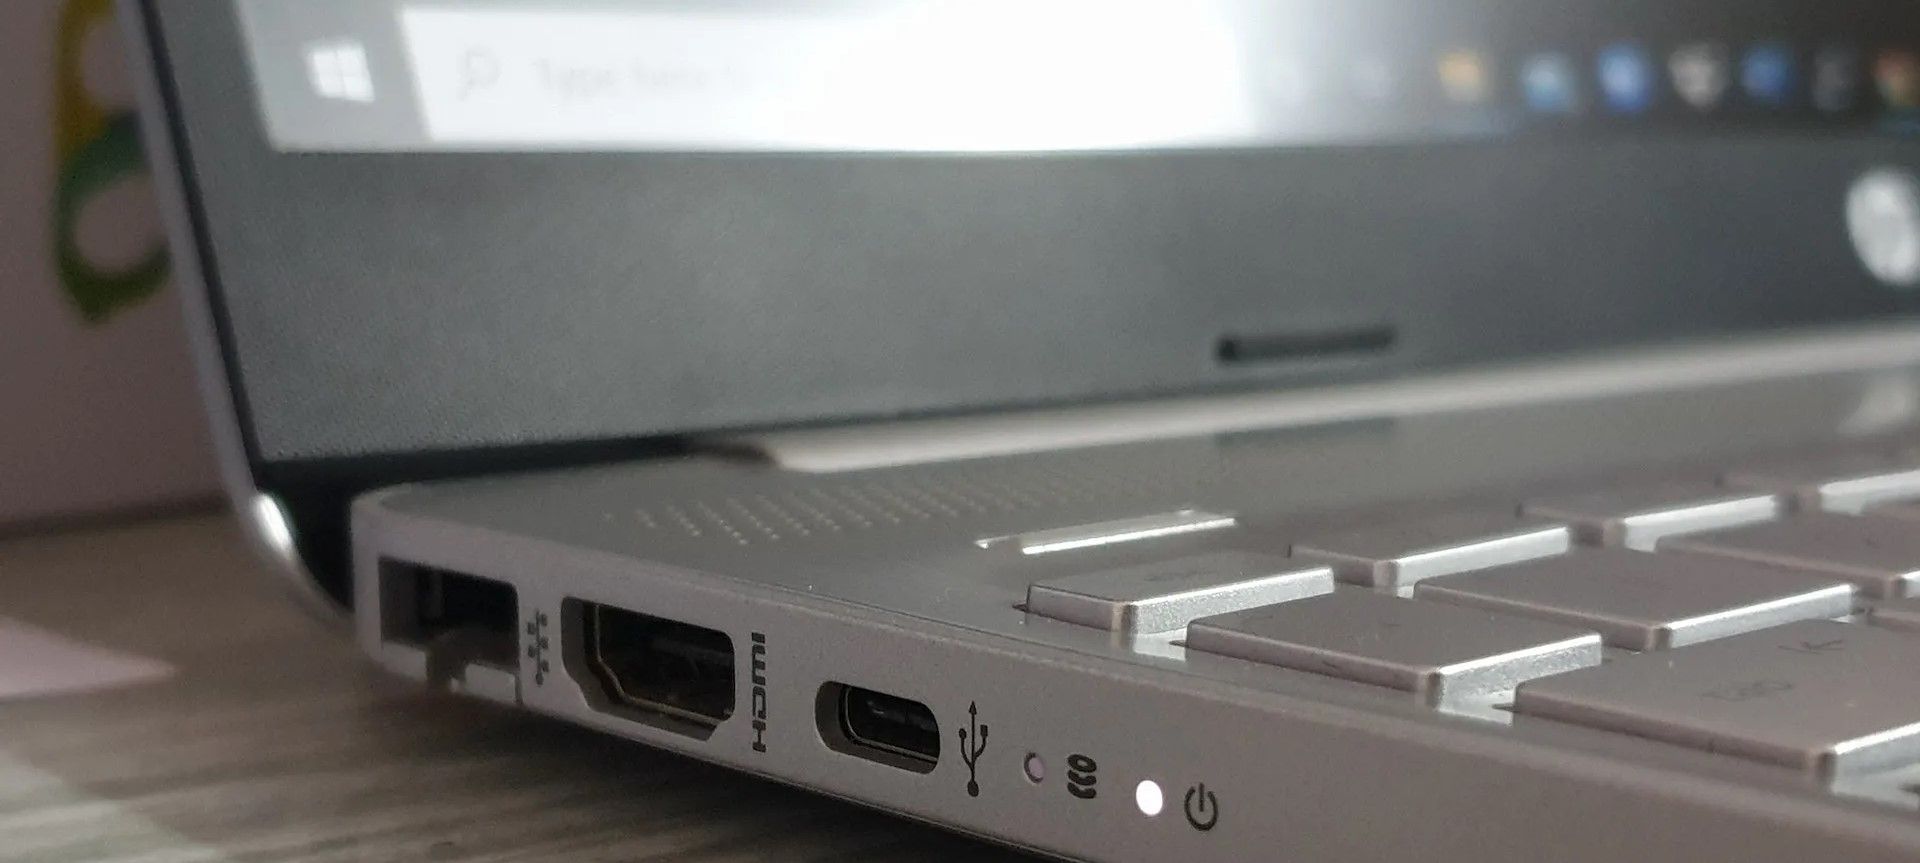 A closeup of the ports on a laptop